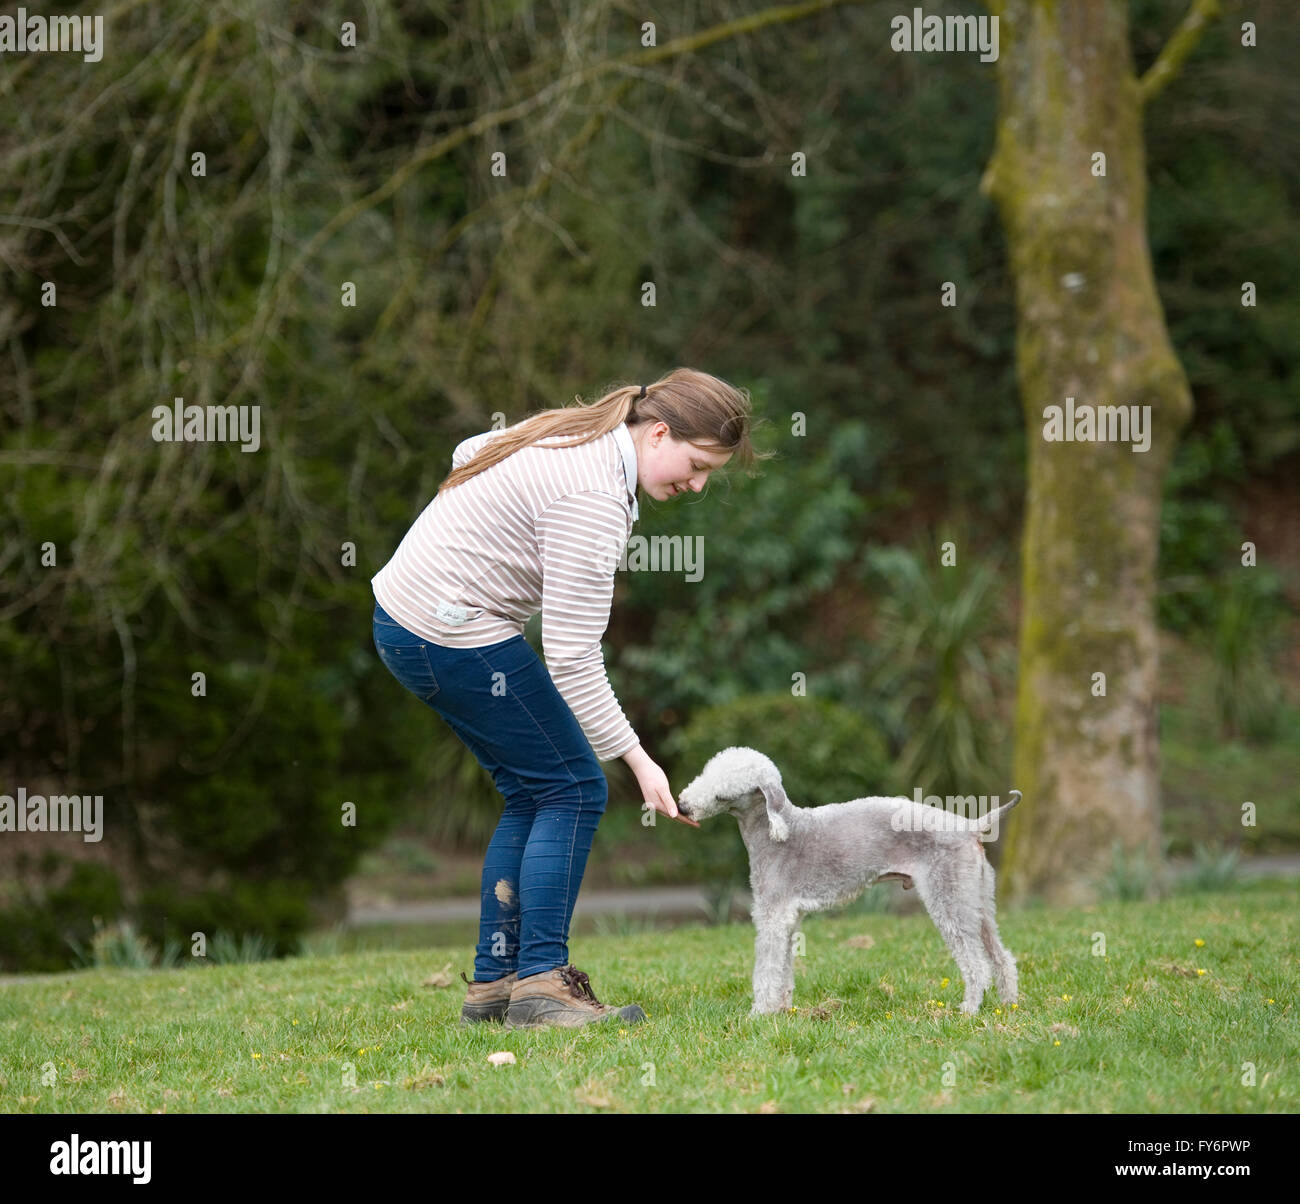 person feeding a dog in the park Stock Photo